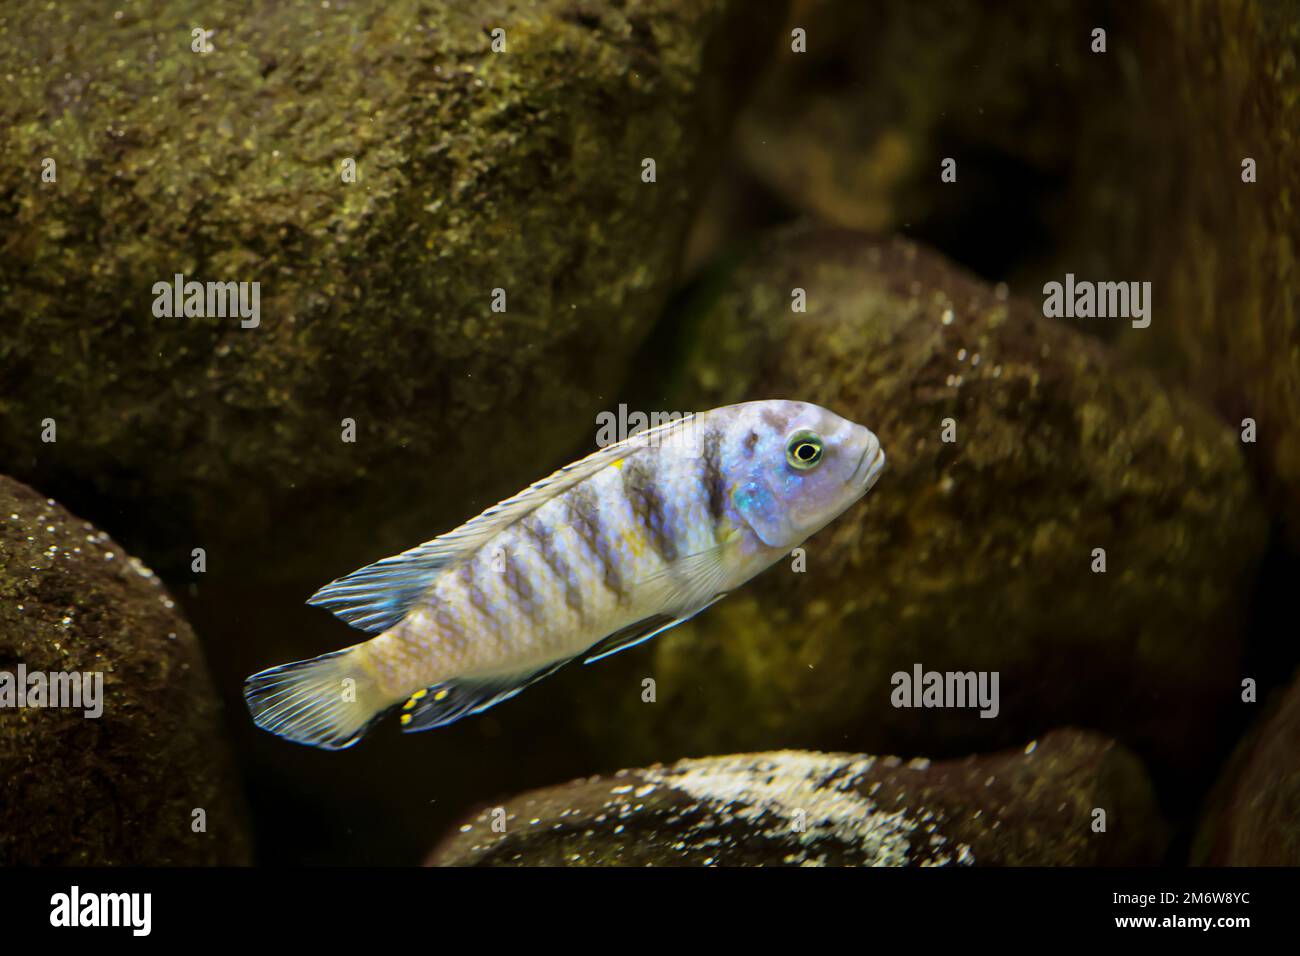 Portrait of a colorful Malawi cichlid in the aquarium. Stock Photo